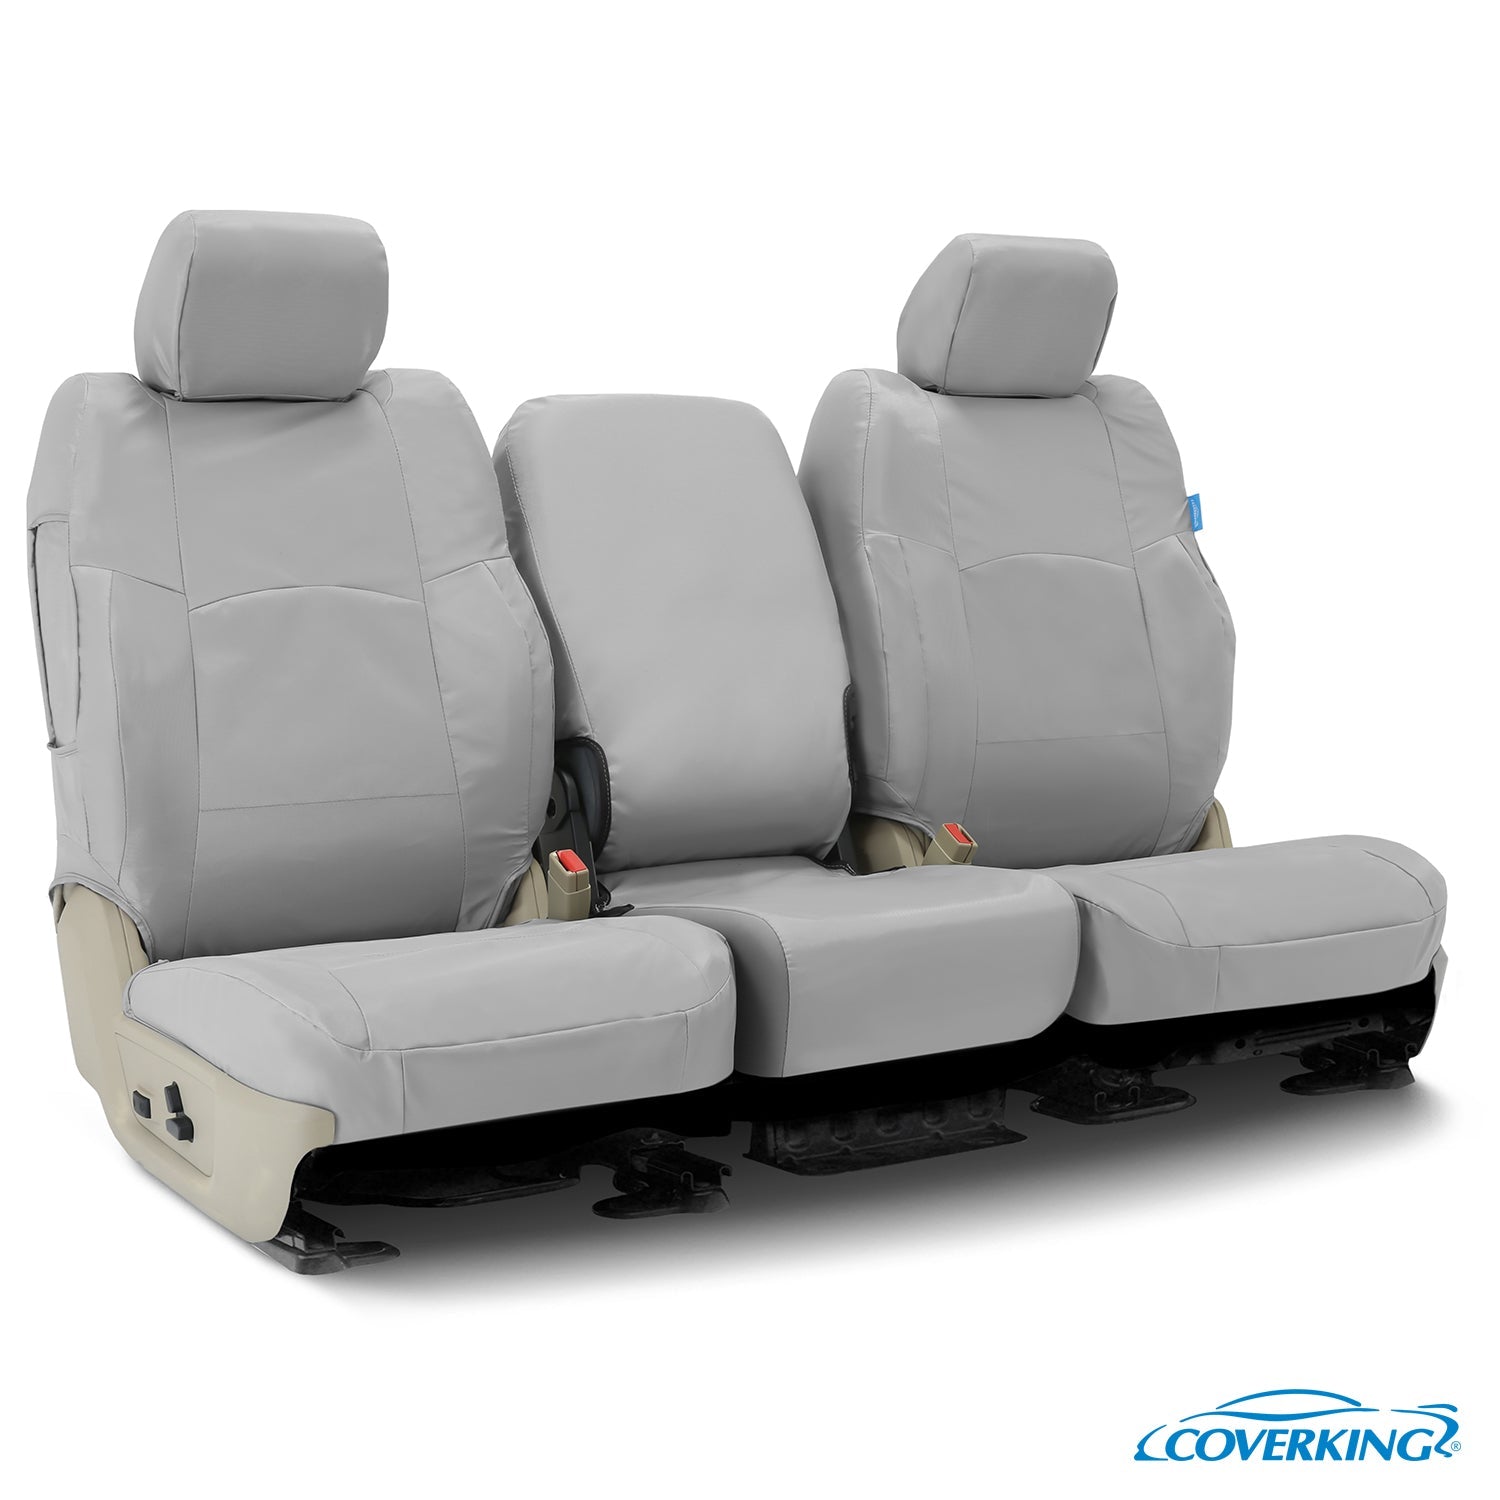 Coverking Ballistic Seat Covers - Partsaccessoriesusa